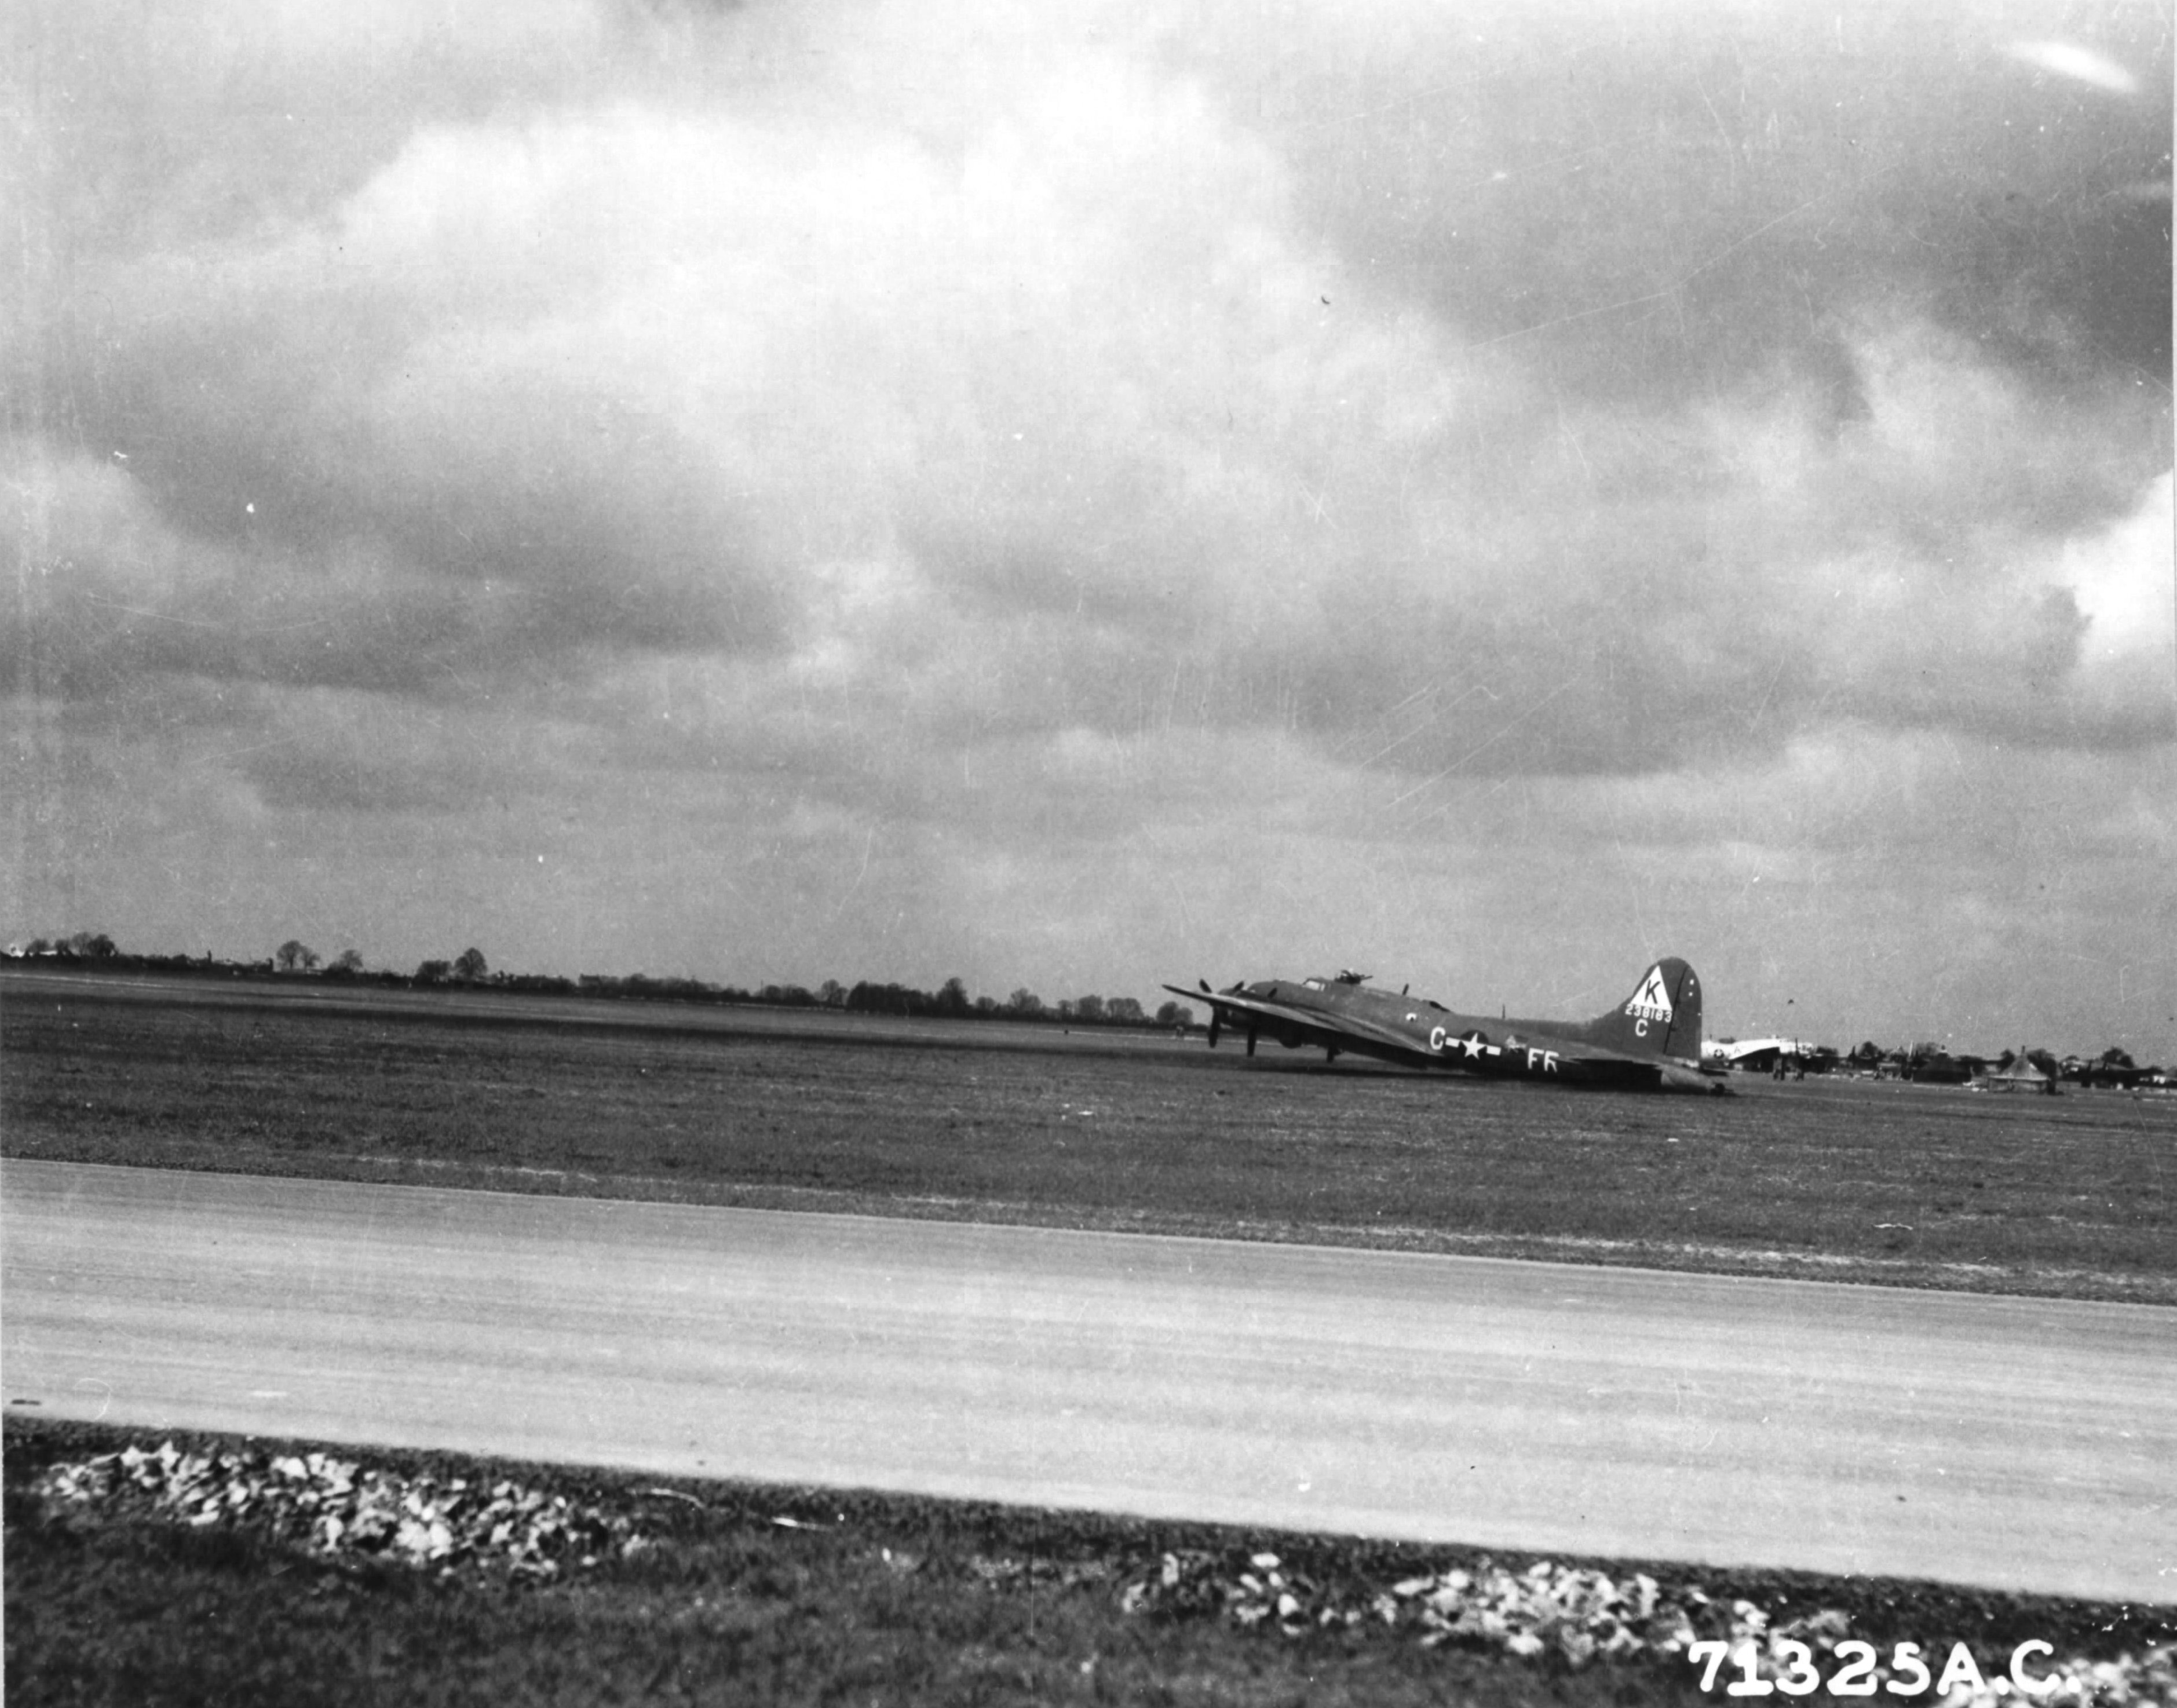 B-17G Fortress “Lost Angel” Belly landed at RAF Kimbolton after being damaged over Magdeburg, Germany, 28 Sep 1944. Note that the crew had unbolted and dropped the ball turret to keep it from breaking the airframe’s back